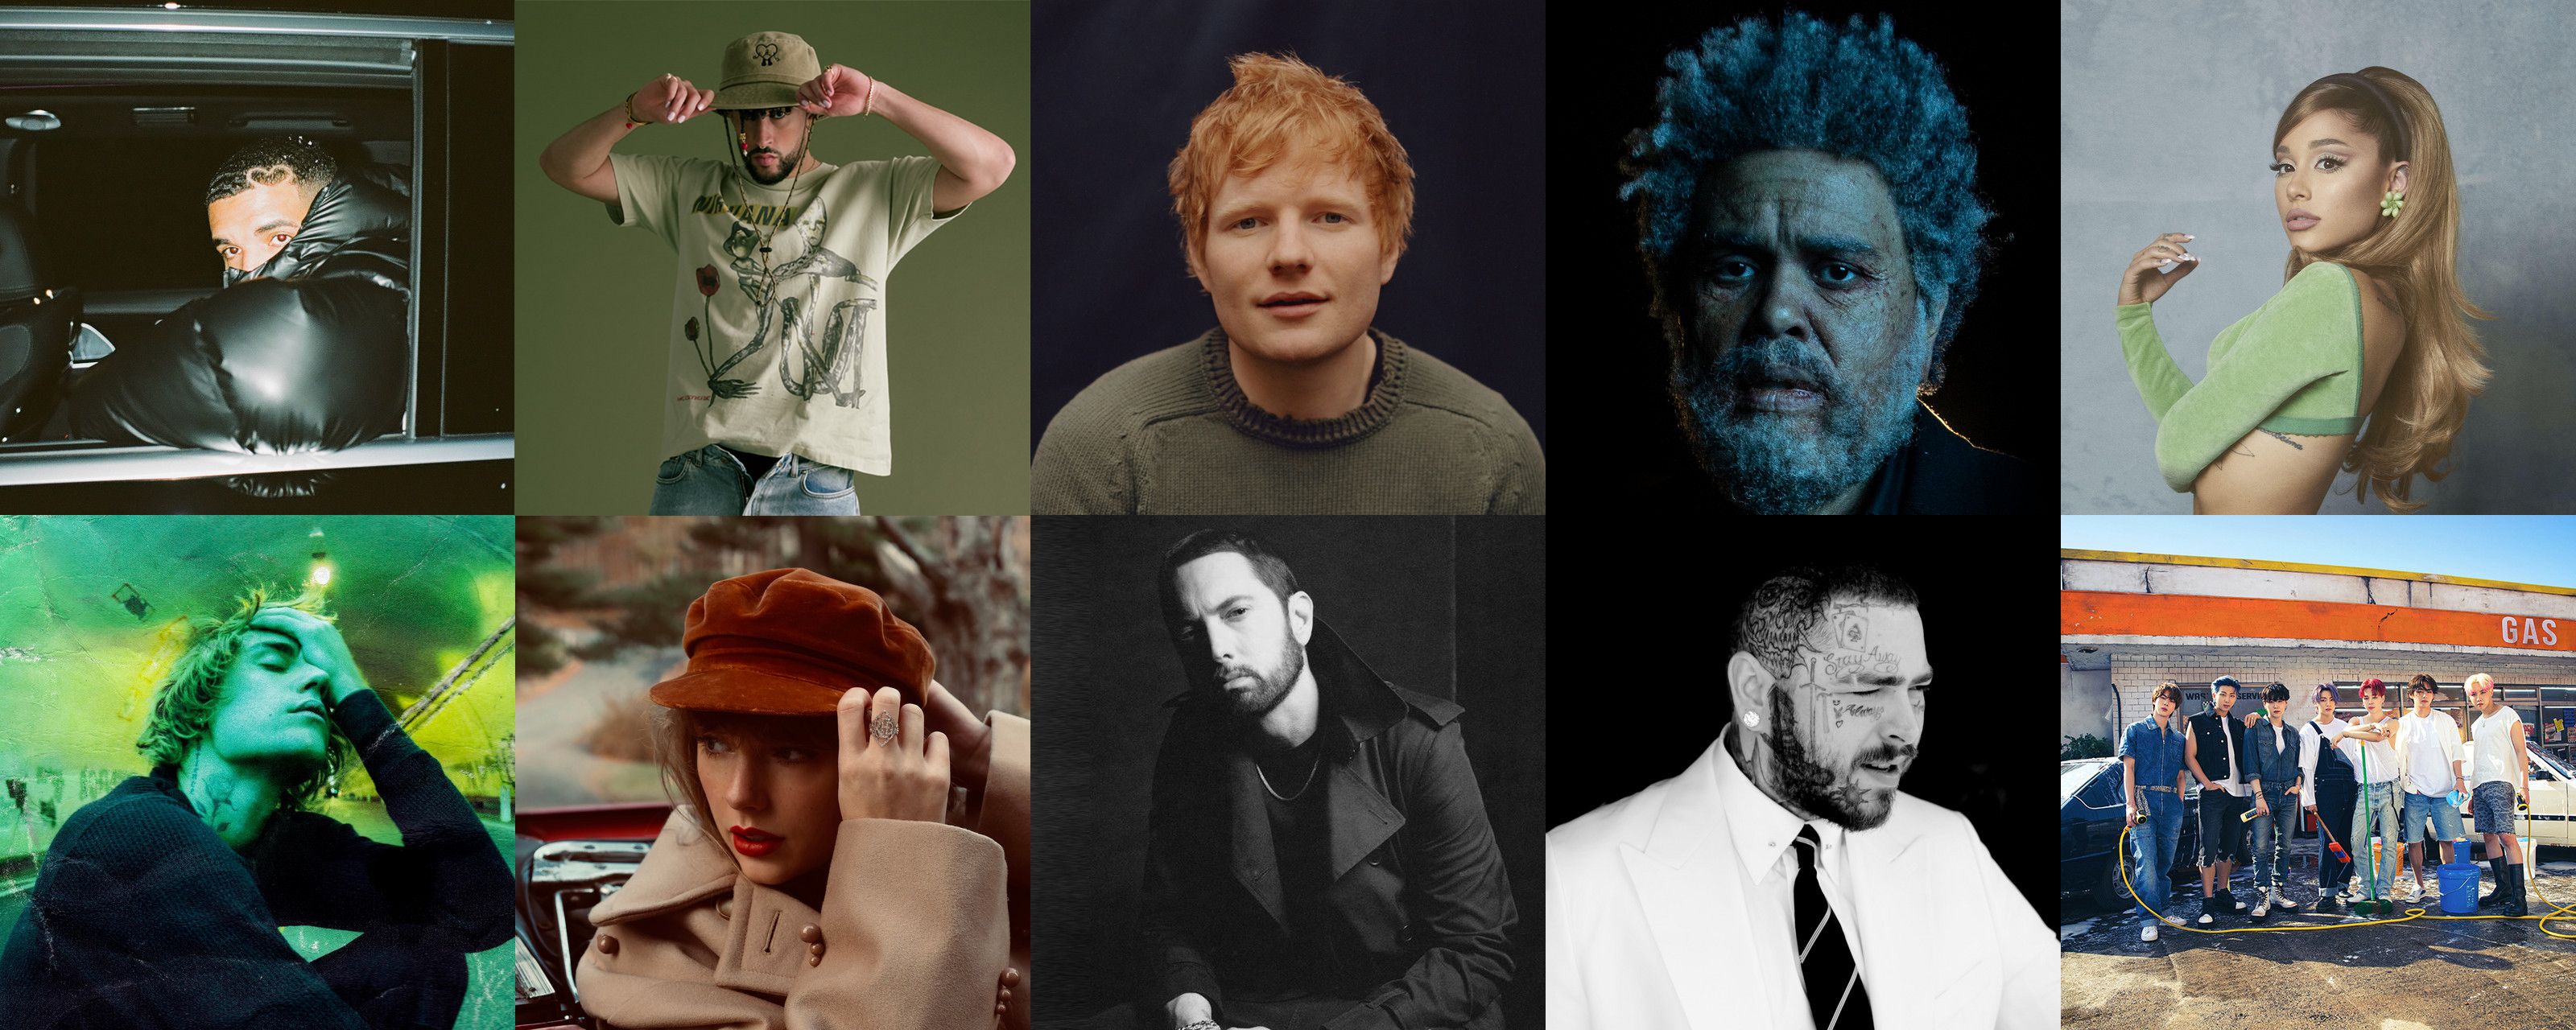 How much money have the top 10 artists earned on Spotify in 2022?